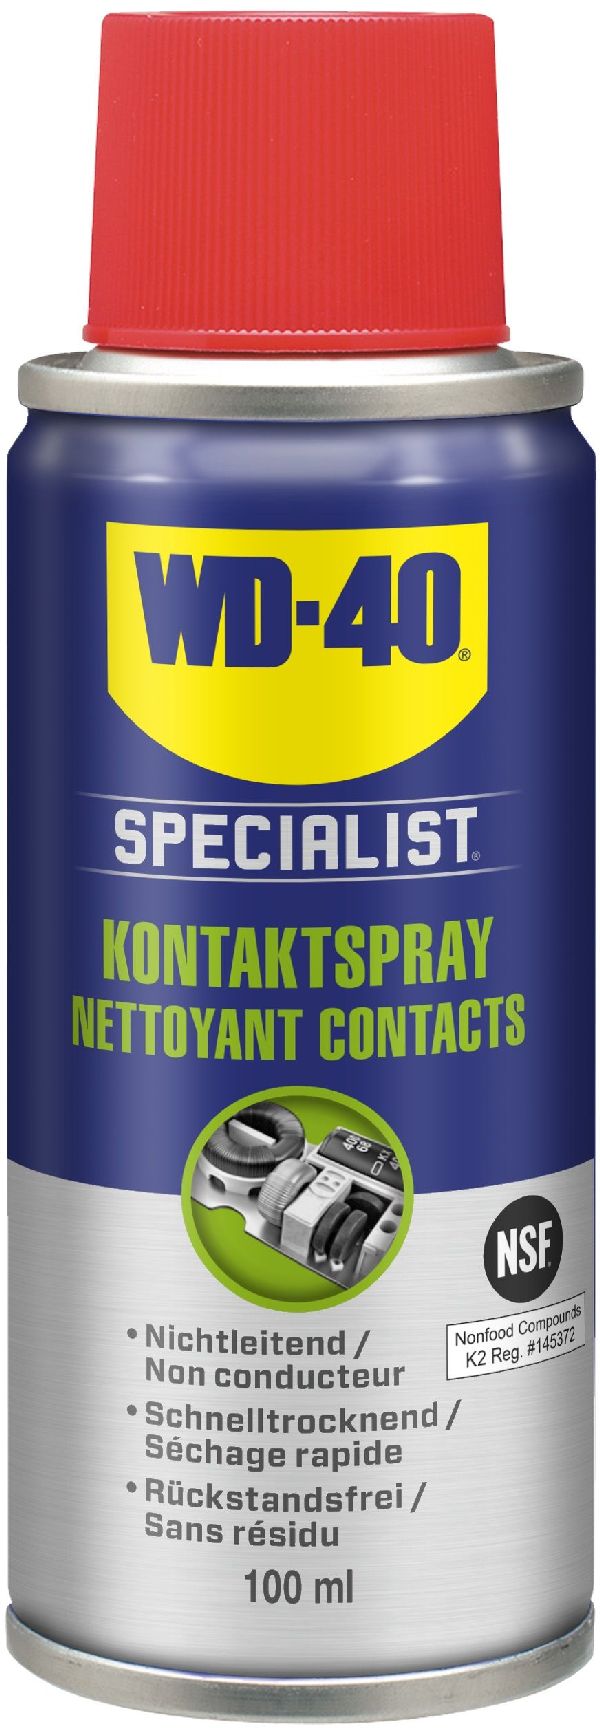 WD-40 Specialist Nettoyant Contacts Bombe arosol 100 ml